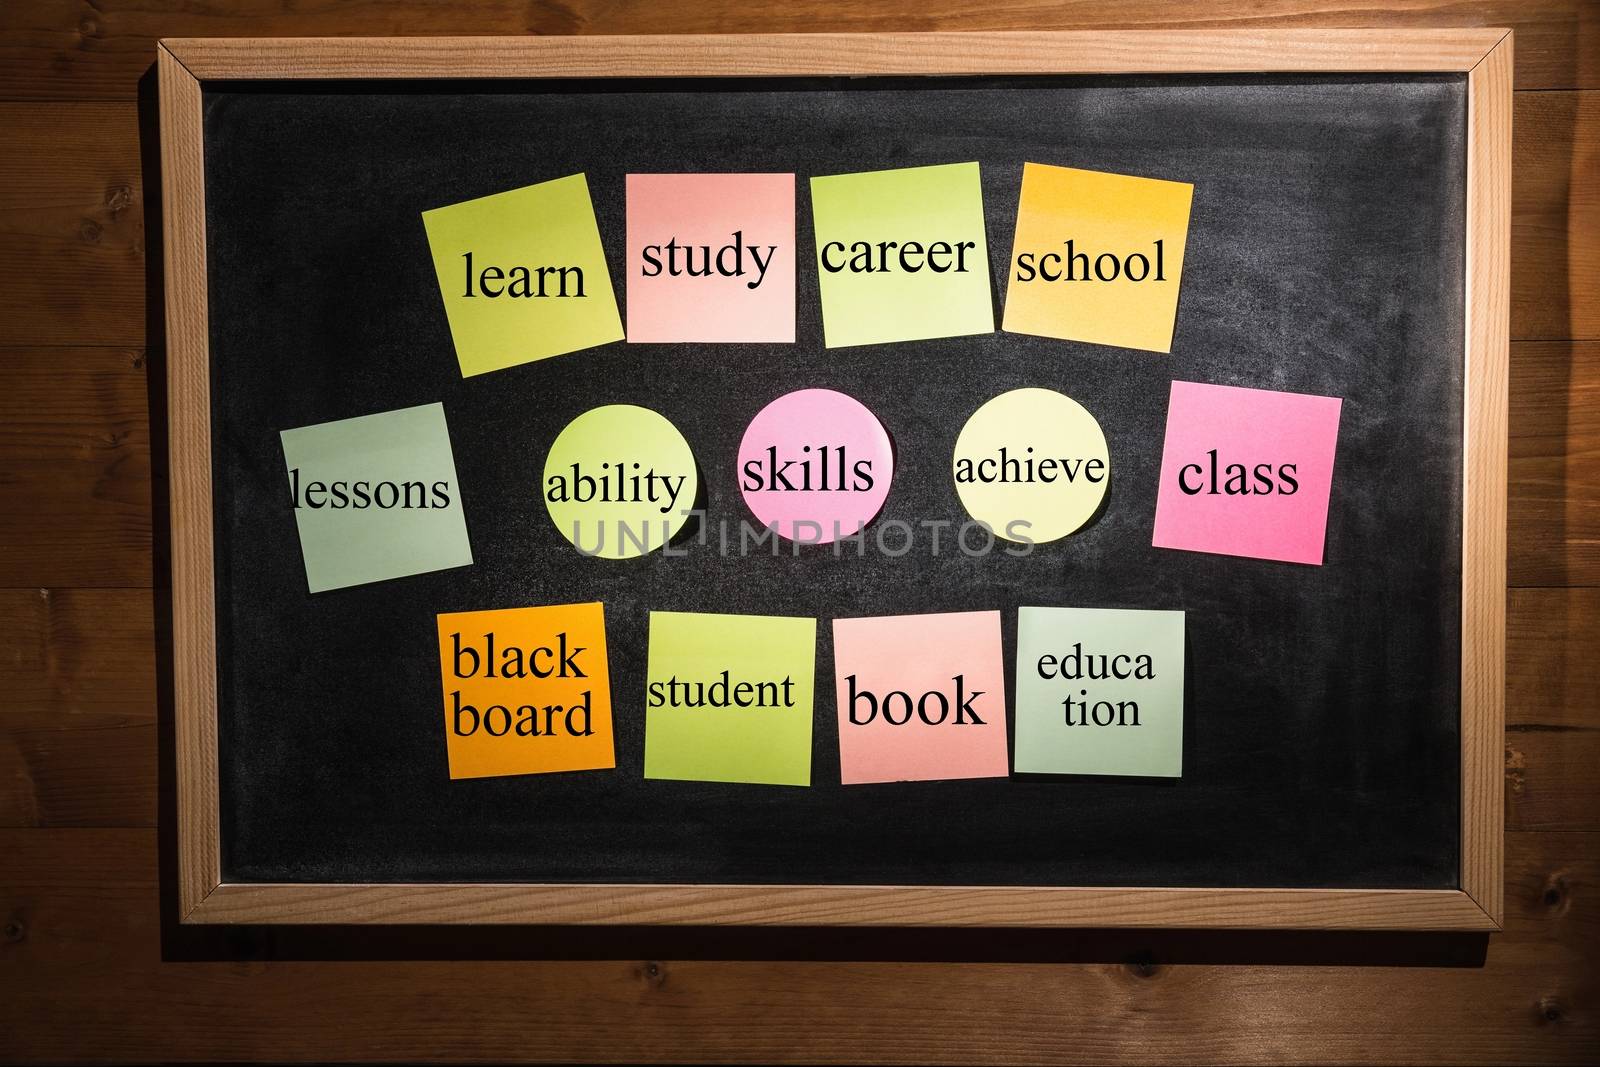 Memo with education terms on a blackboard